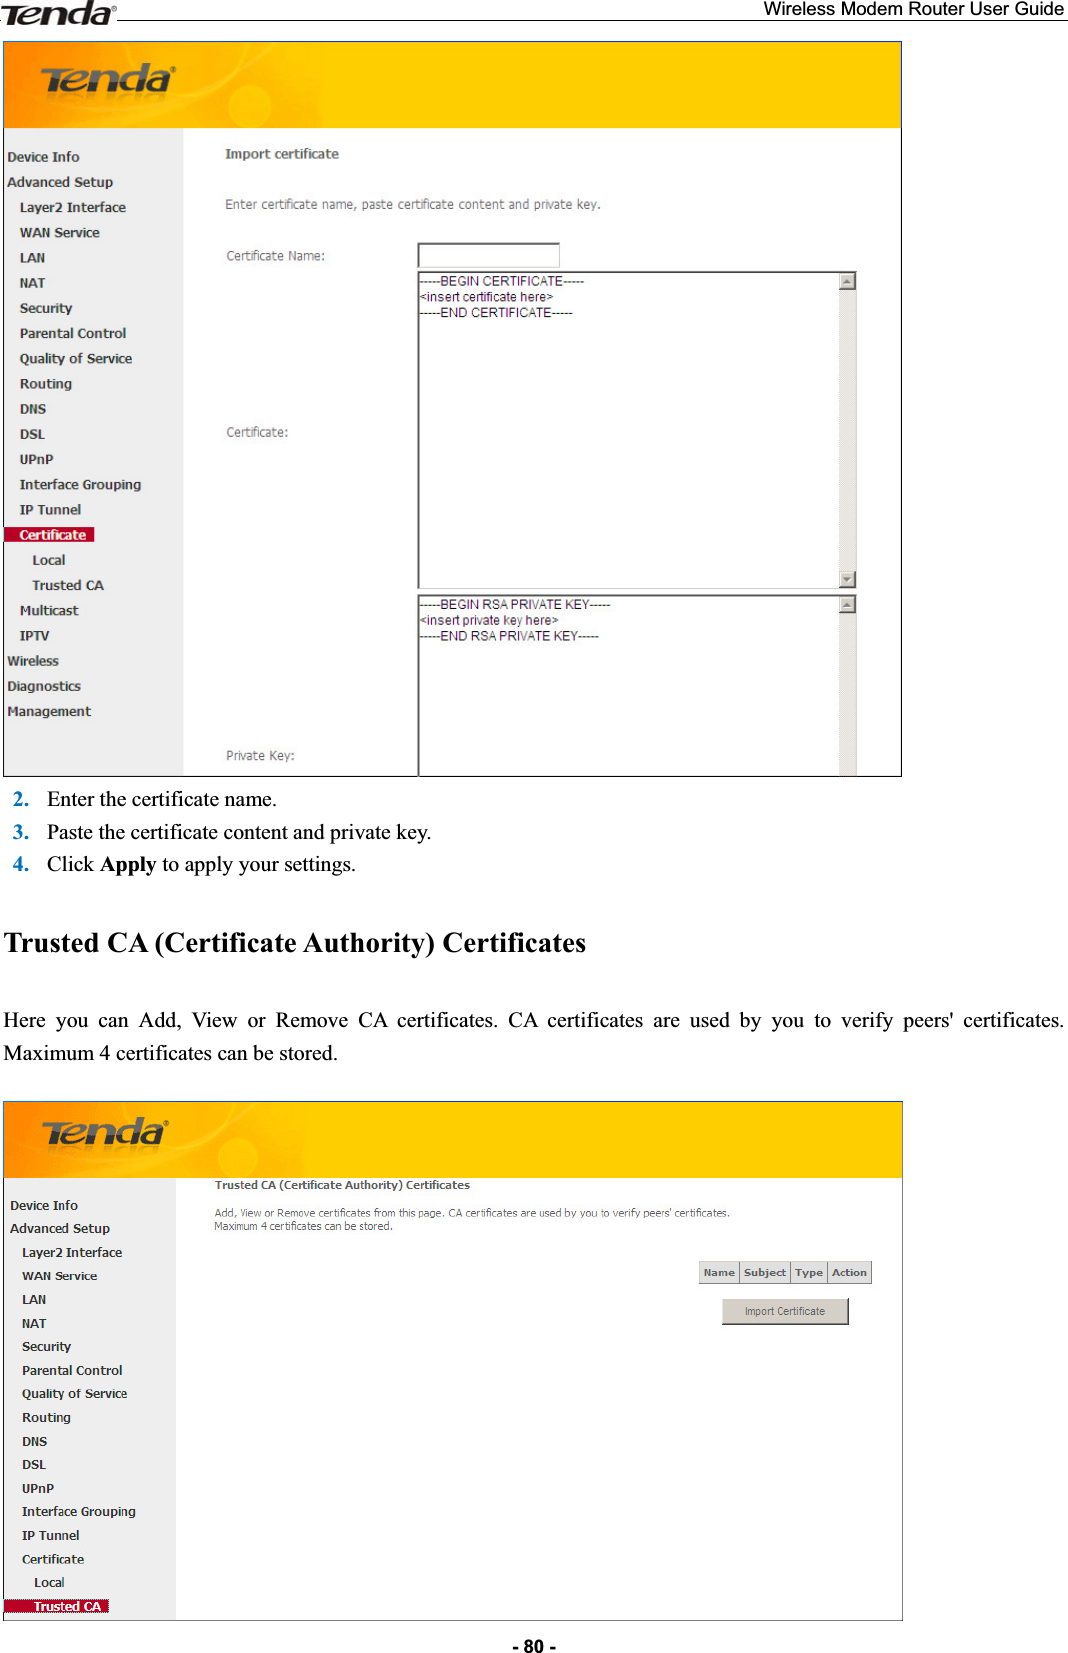 Wireless Modem Router User Guide- 80 -2. Enter the certificate name. 3. Paste the certificate content and private key. 4. Click Apply to apply your settings. Trusted CA (Certificate Authority) Certificates Here you can Add, View or Remove CA certificates. CA certificates are used by you to verify peers&apos; certificates. Maximum 4 certificates can be stored.